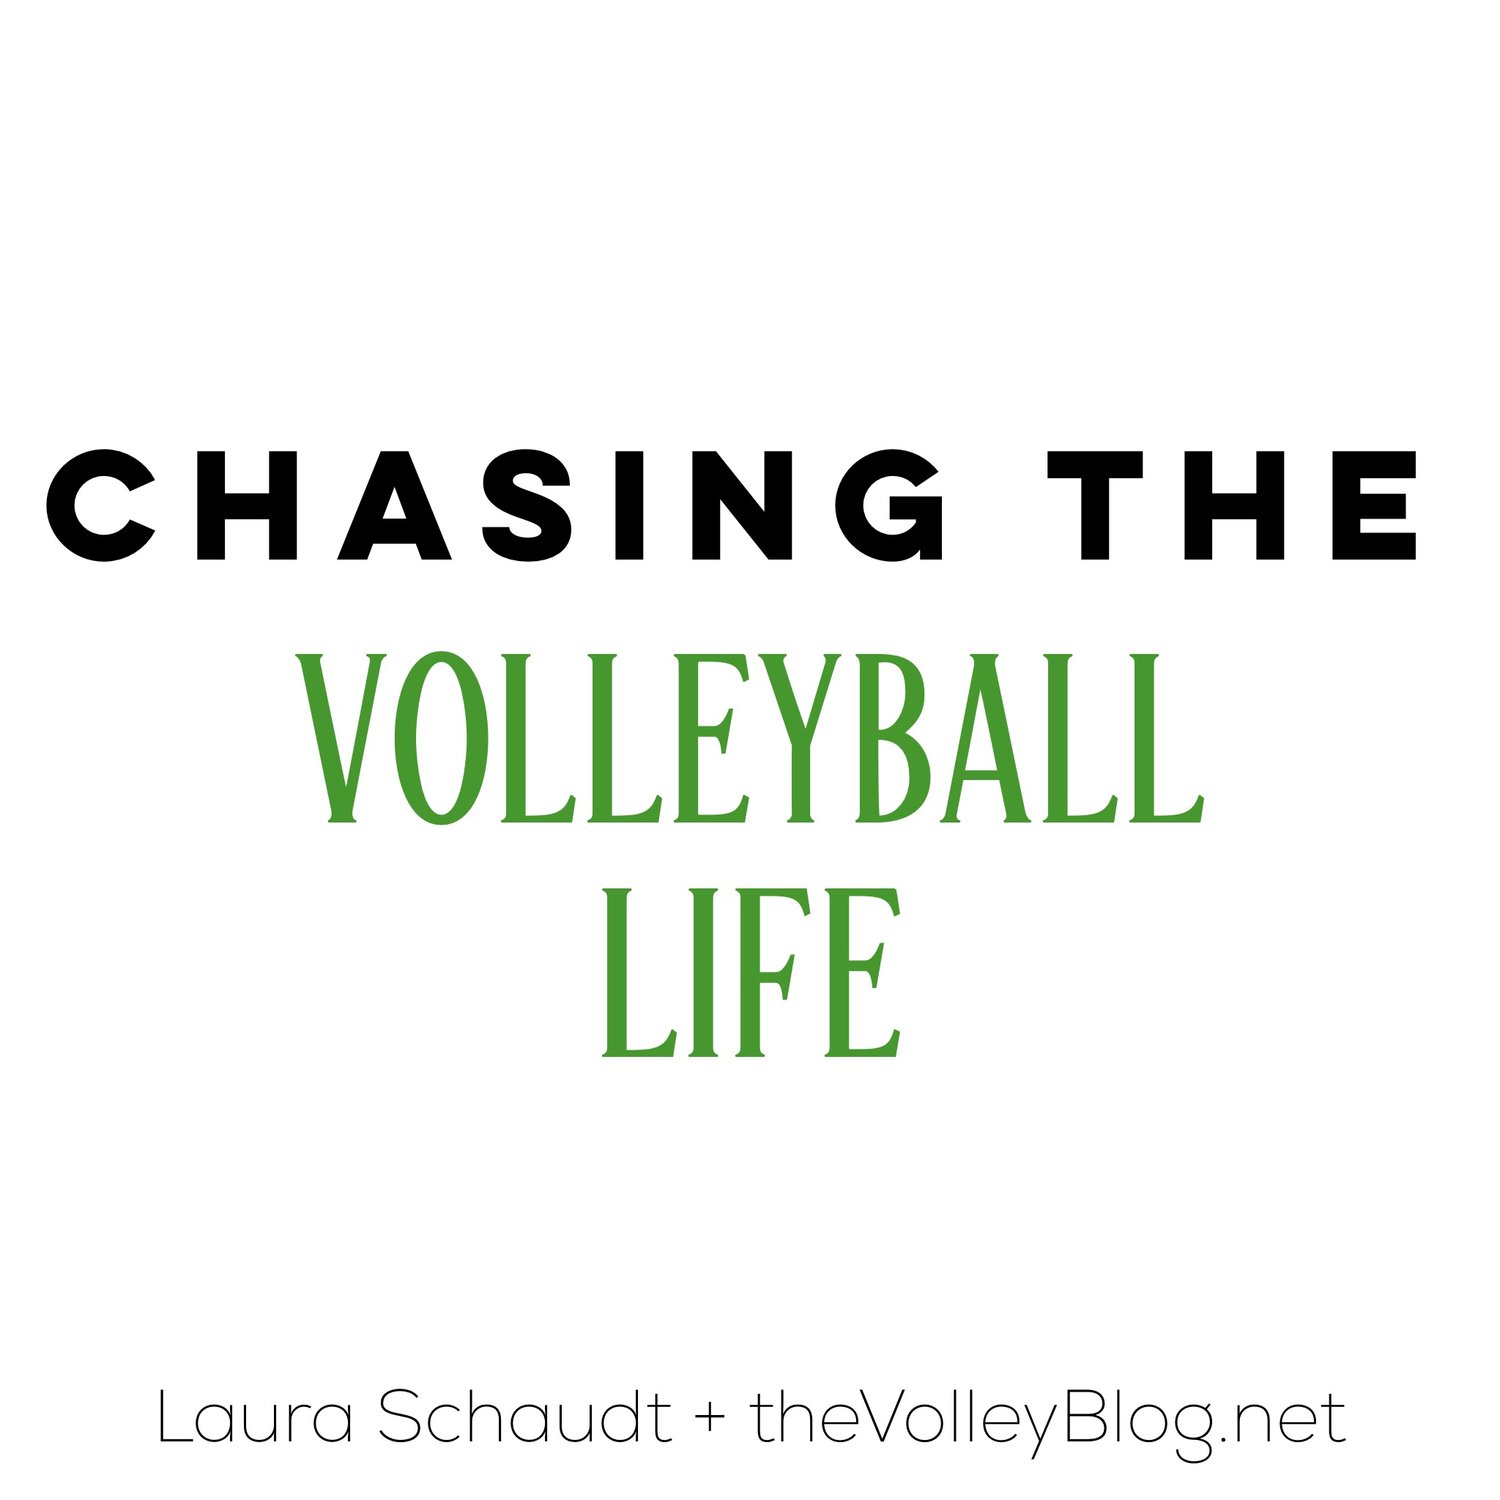 Chasing the Volleyball Life — the Volleyblog